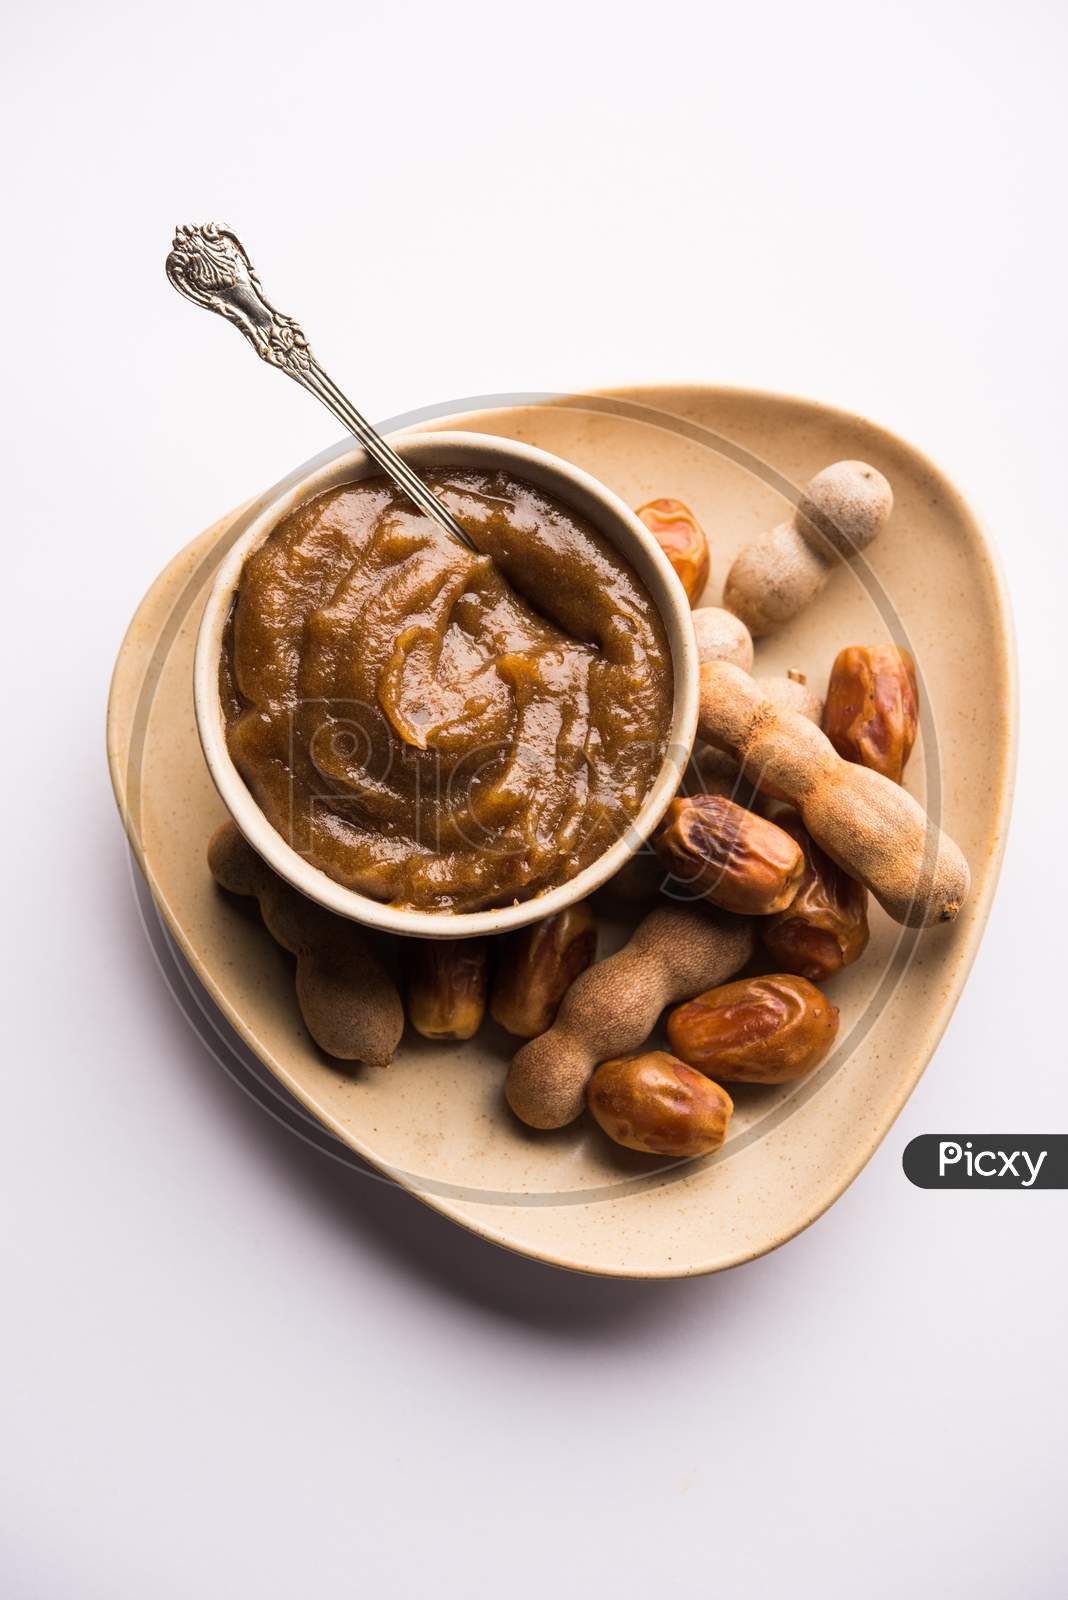 Dates Tamarind Chutney - Khajoor crushed to paste and mixed with Imli or imalee paste, served as a side dish in India